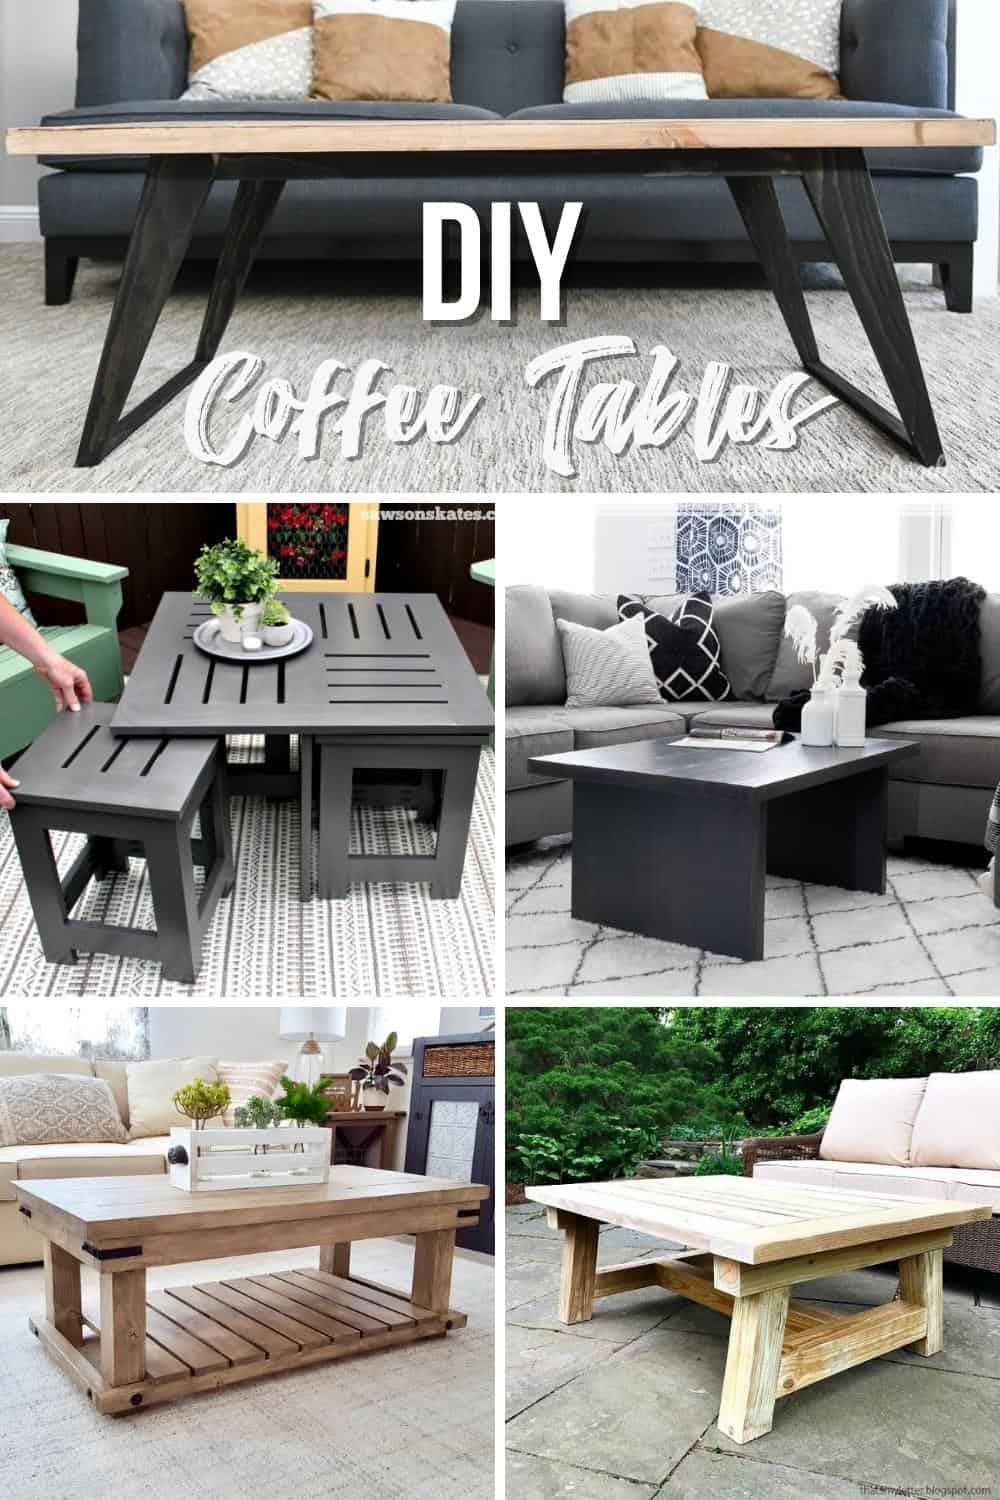 DIY Coffee Table Ideas collage